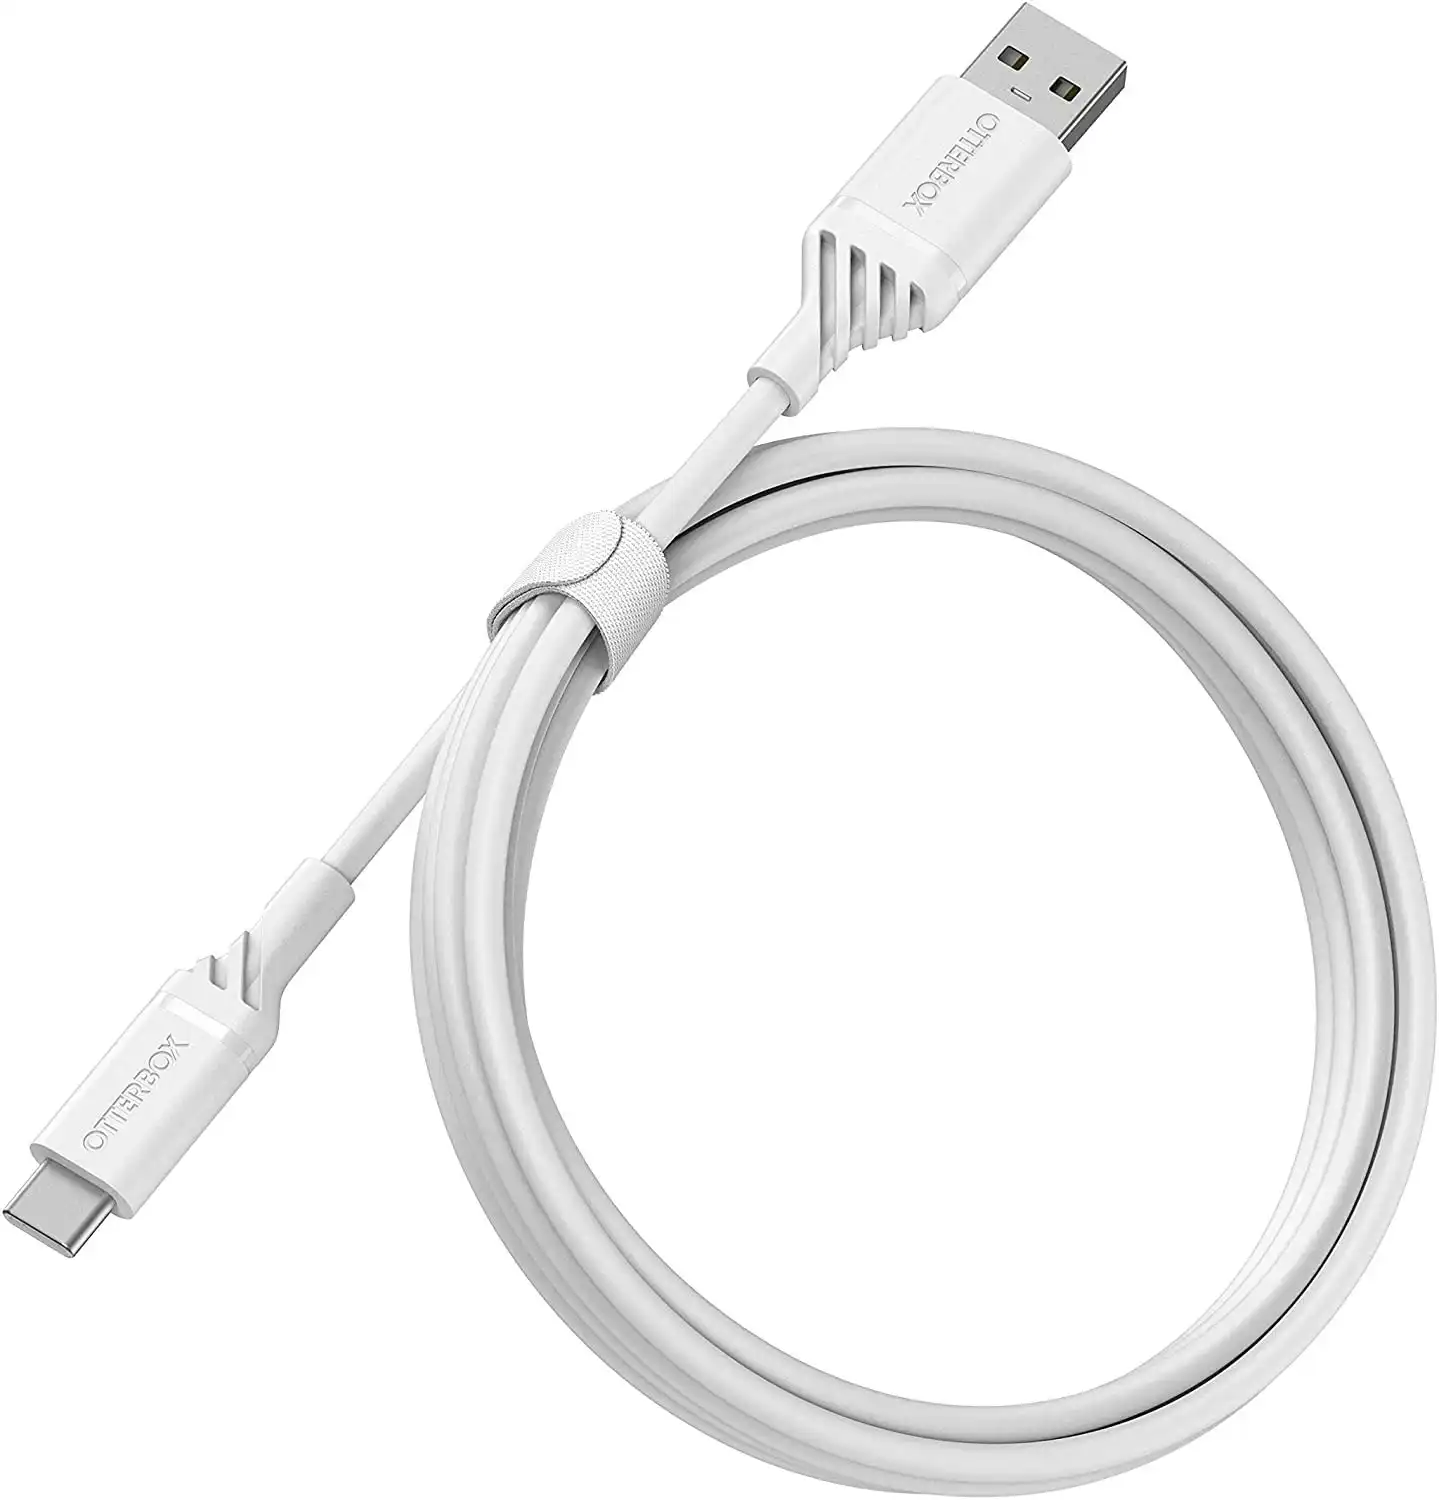 Otterbox Usb-c To Usb-a Cable 1m - Cloud Dream White